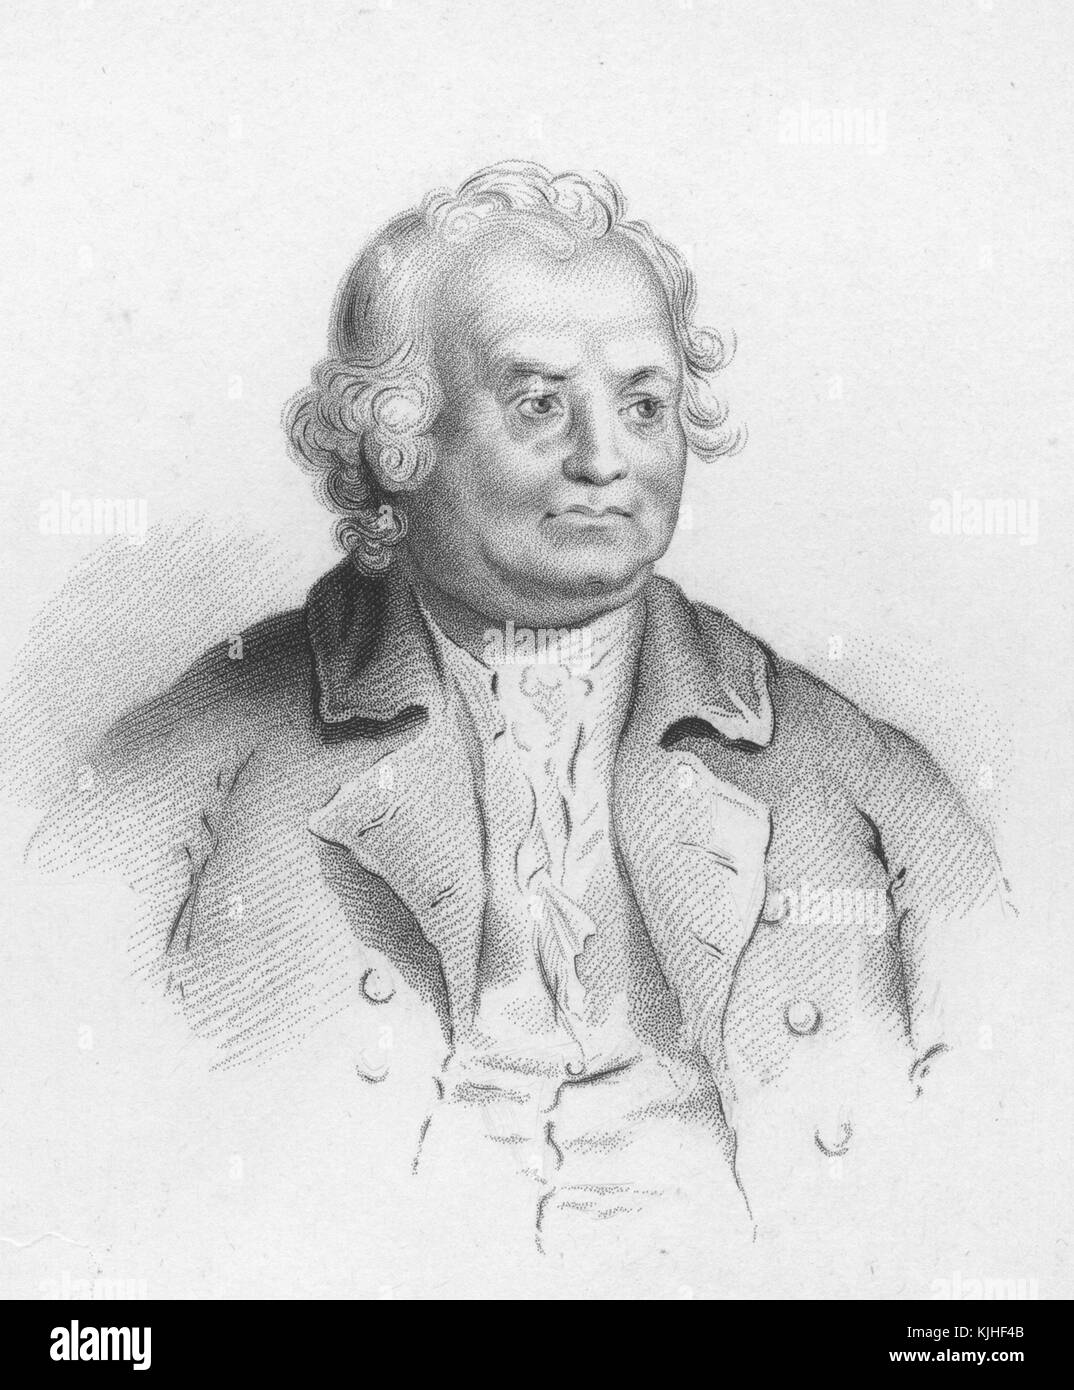 An engraving from a painting of Israel Putnam, he was an American military officer who served during the French and Indian War as well as the American Revolutionary War, he was one of the founders of Connecticut's chapter of the Sons of Liberty, he is best known for his contributions to the Battle of Bunker Hill, he is also one of the officers to which the saying 'Don't fire until you see the whites of their eyes' is attributed, Israel, 1830. From the New York Public Library. Stock Photo